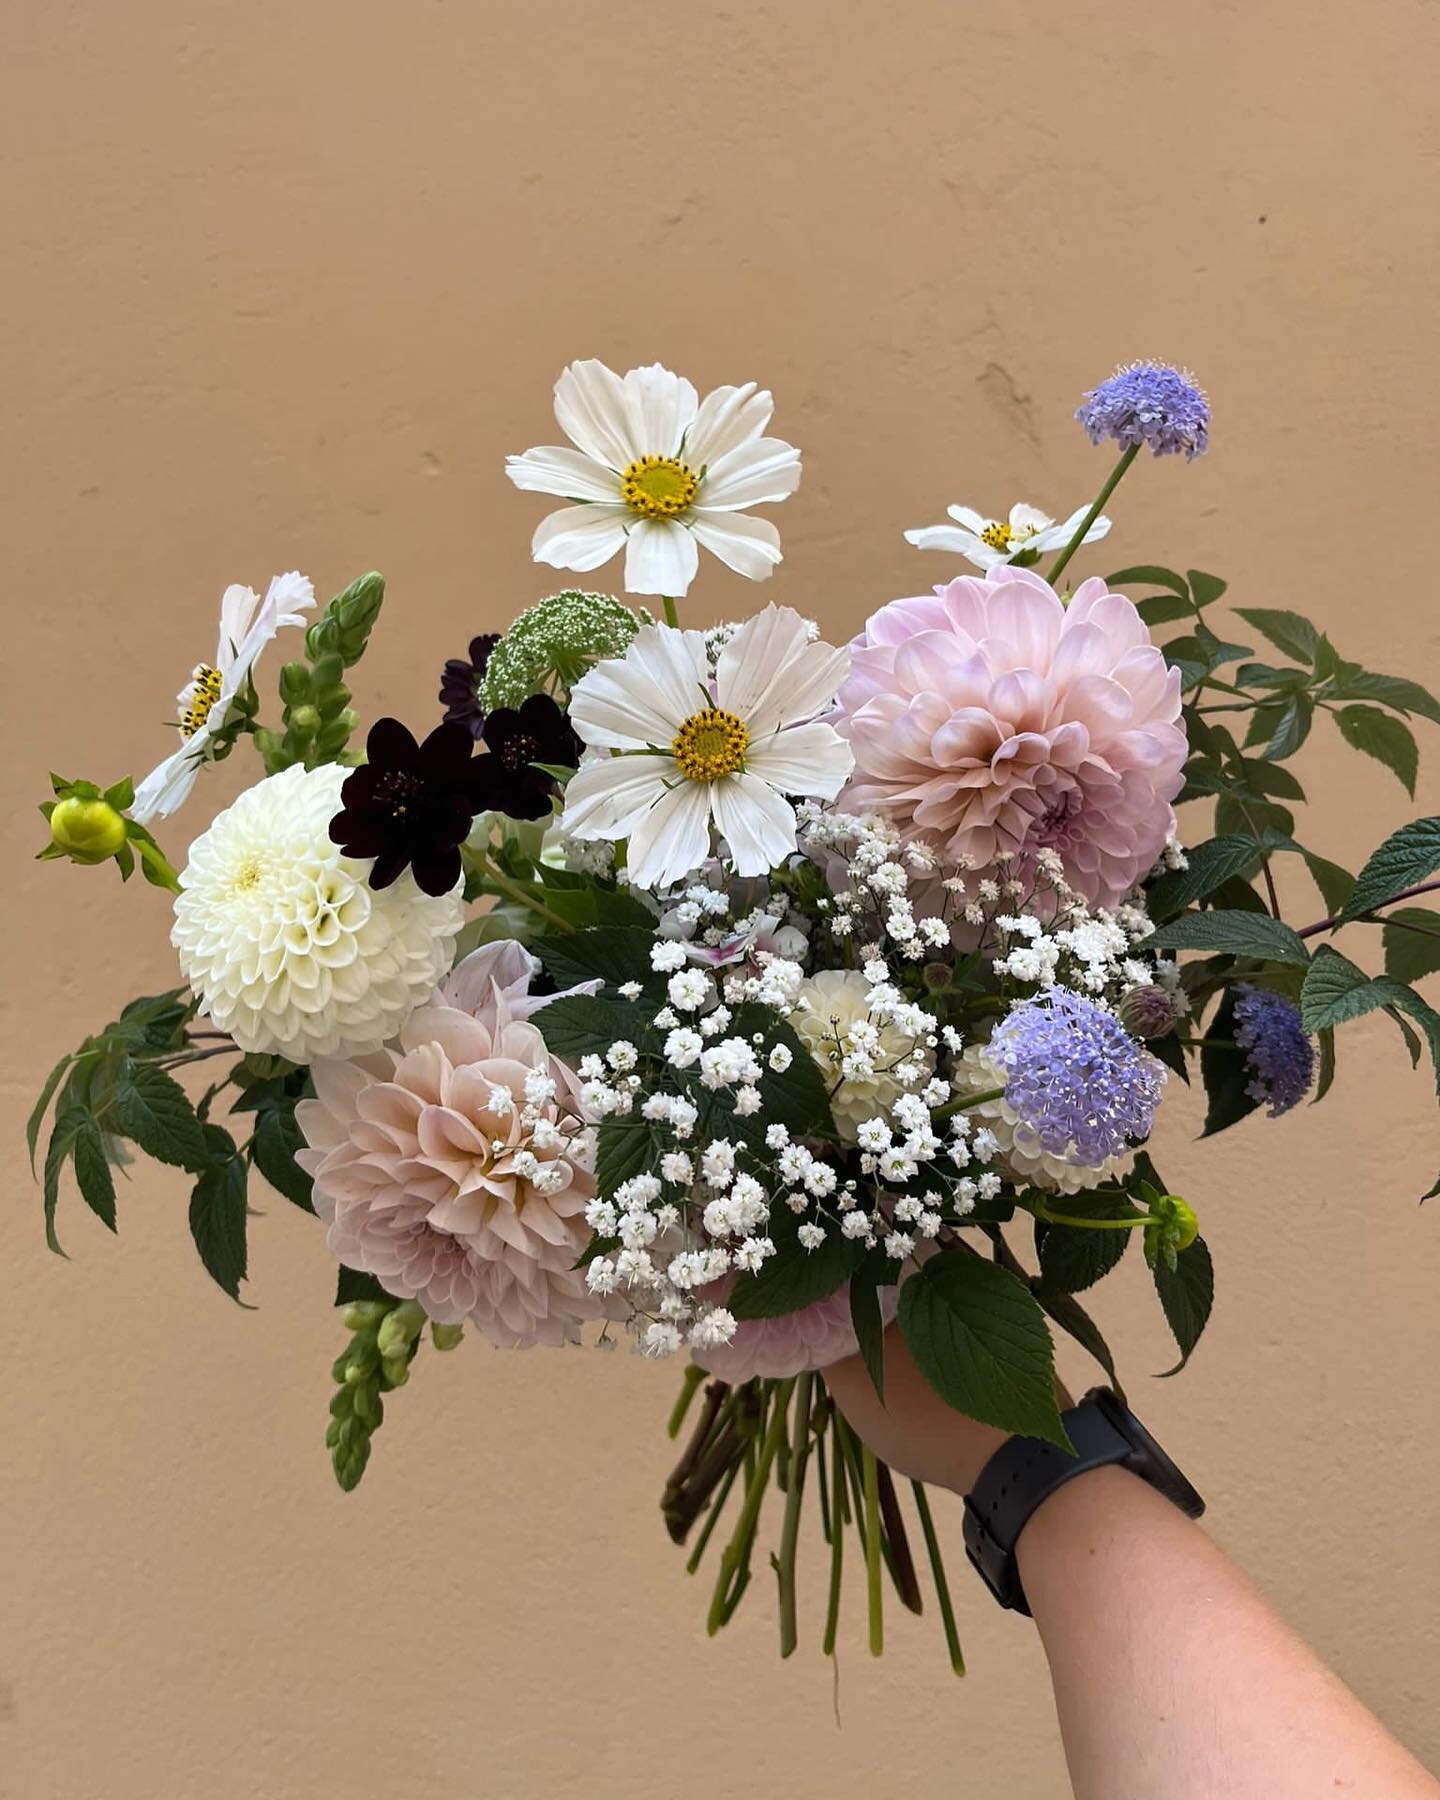 This beauty, made and designed by @anniaro for last week&rsquo;s fab bride Satu is just so stunning don&rsquo;t you think? 

And this week&rsquo;s bridal for lovely Antonia is also stuning 😍 we&rsquo;ll share it later this week. 

Blooms by @annanii